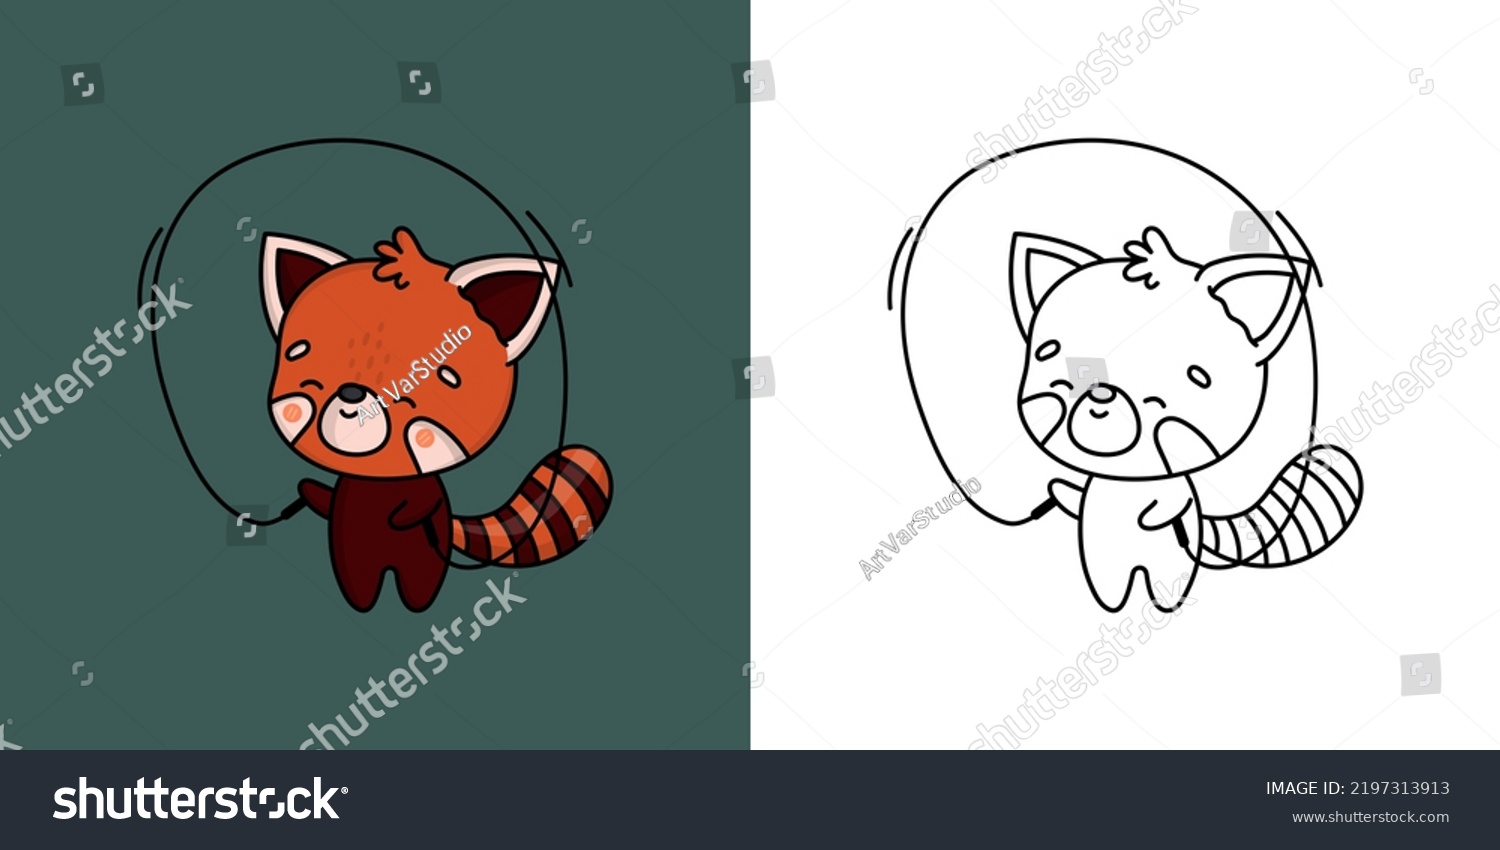 SVG of Kawaii Red Panda Sportsman Clipart Multicolored and Black and White. Cute Animal Sportsman. Vector Illustration of a Kawaii Animal for Stickers, Prints for Clothes, Baby Shower, Coloring Pages.
 svg